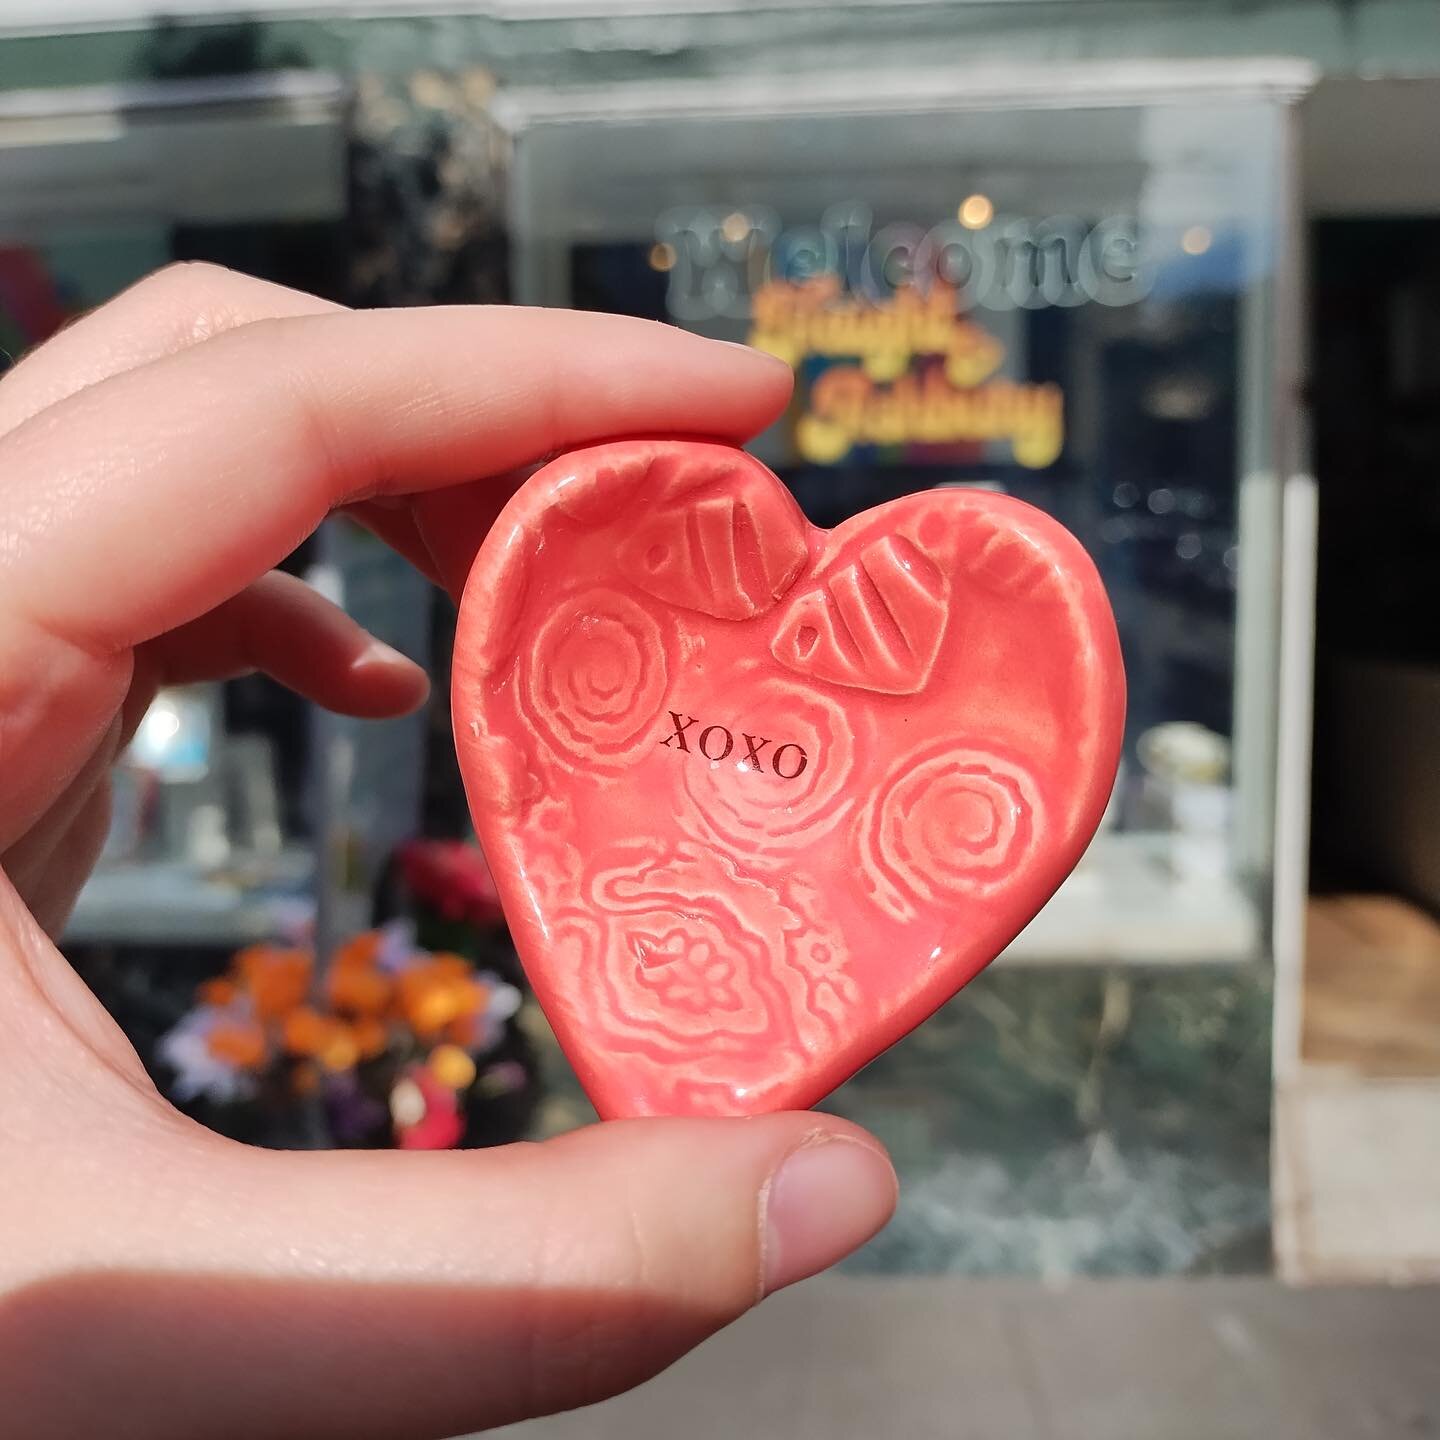 I left my ❤️ in San Francisco but you can still give yours to your Valentine! 💝 

#haightashbury #summeroflove #hippieforlife #haight #ashbury #sanfrancisco #bayarea #shoplocal #smallbusiness #community #peaceandlove #haightashburylife #sf #haightsf